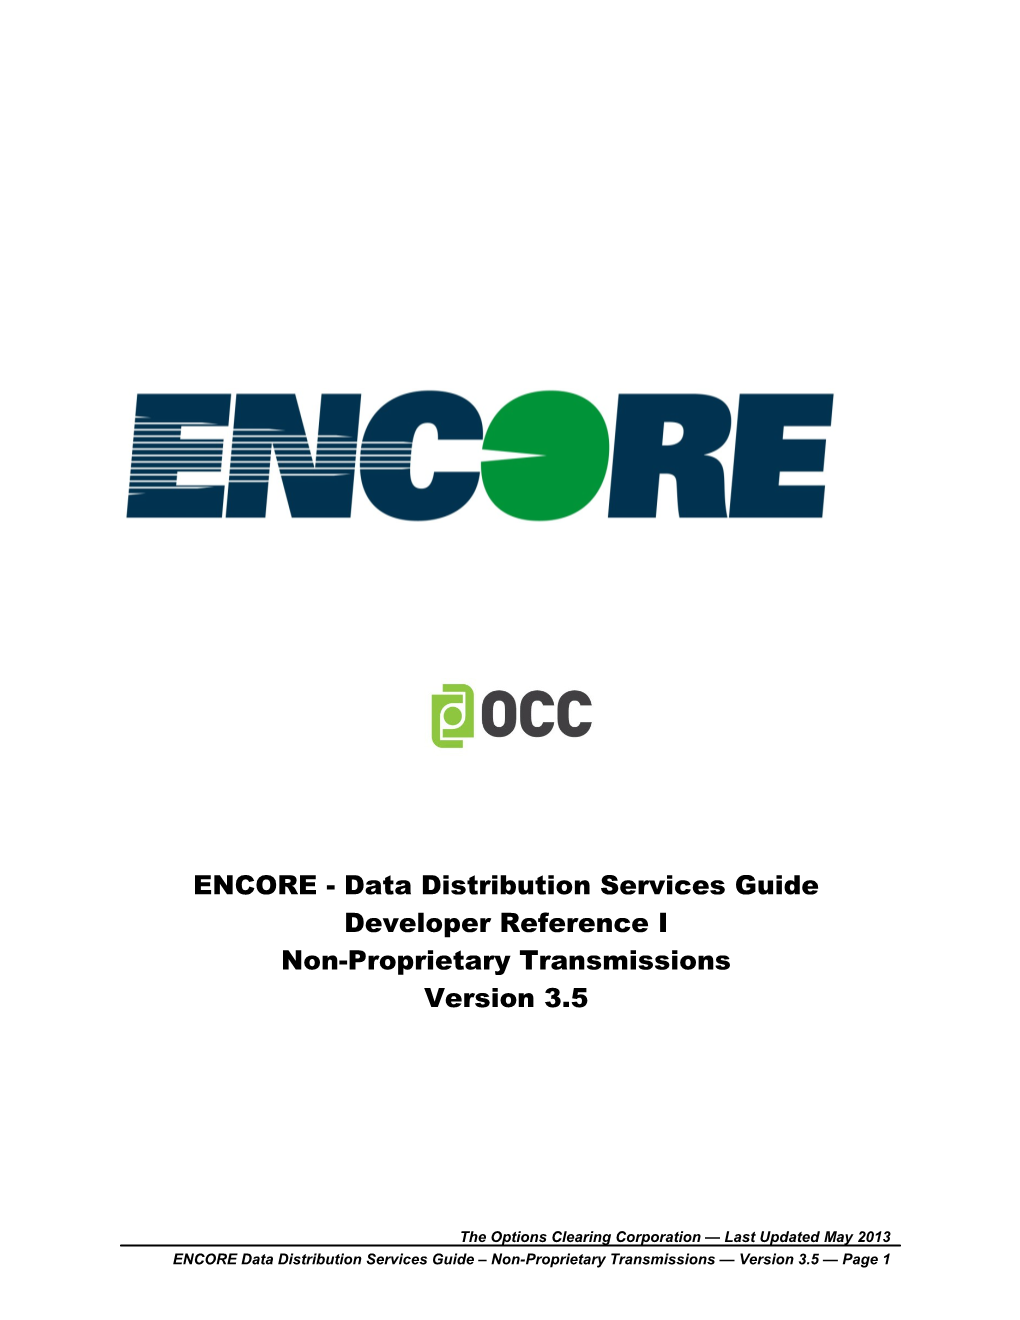 ENCORE DDS Guide - Developer Reference Non-Proprietary Transmissions